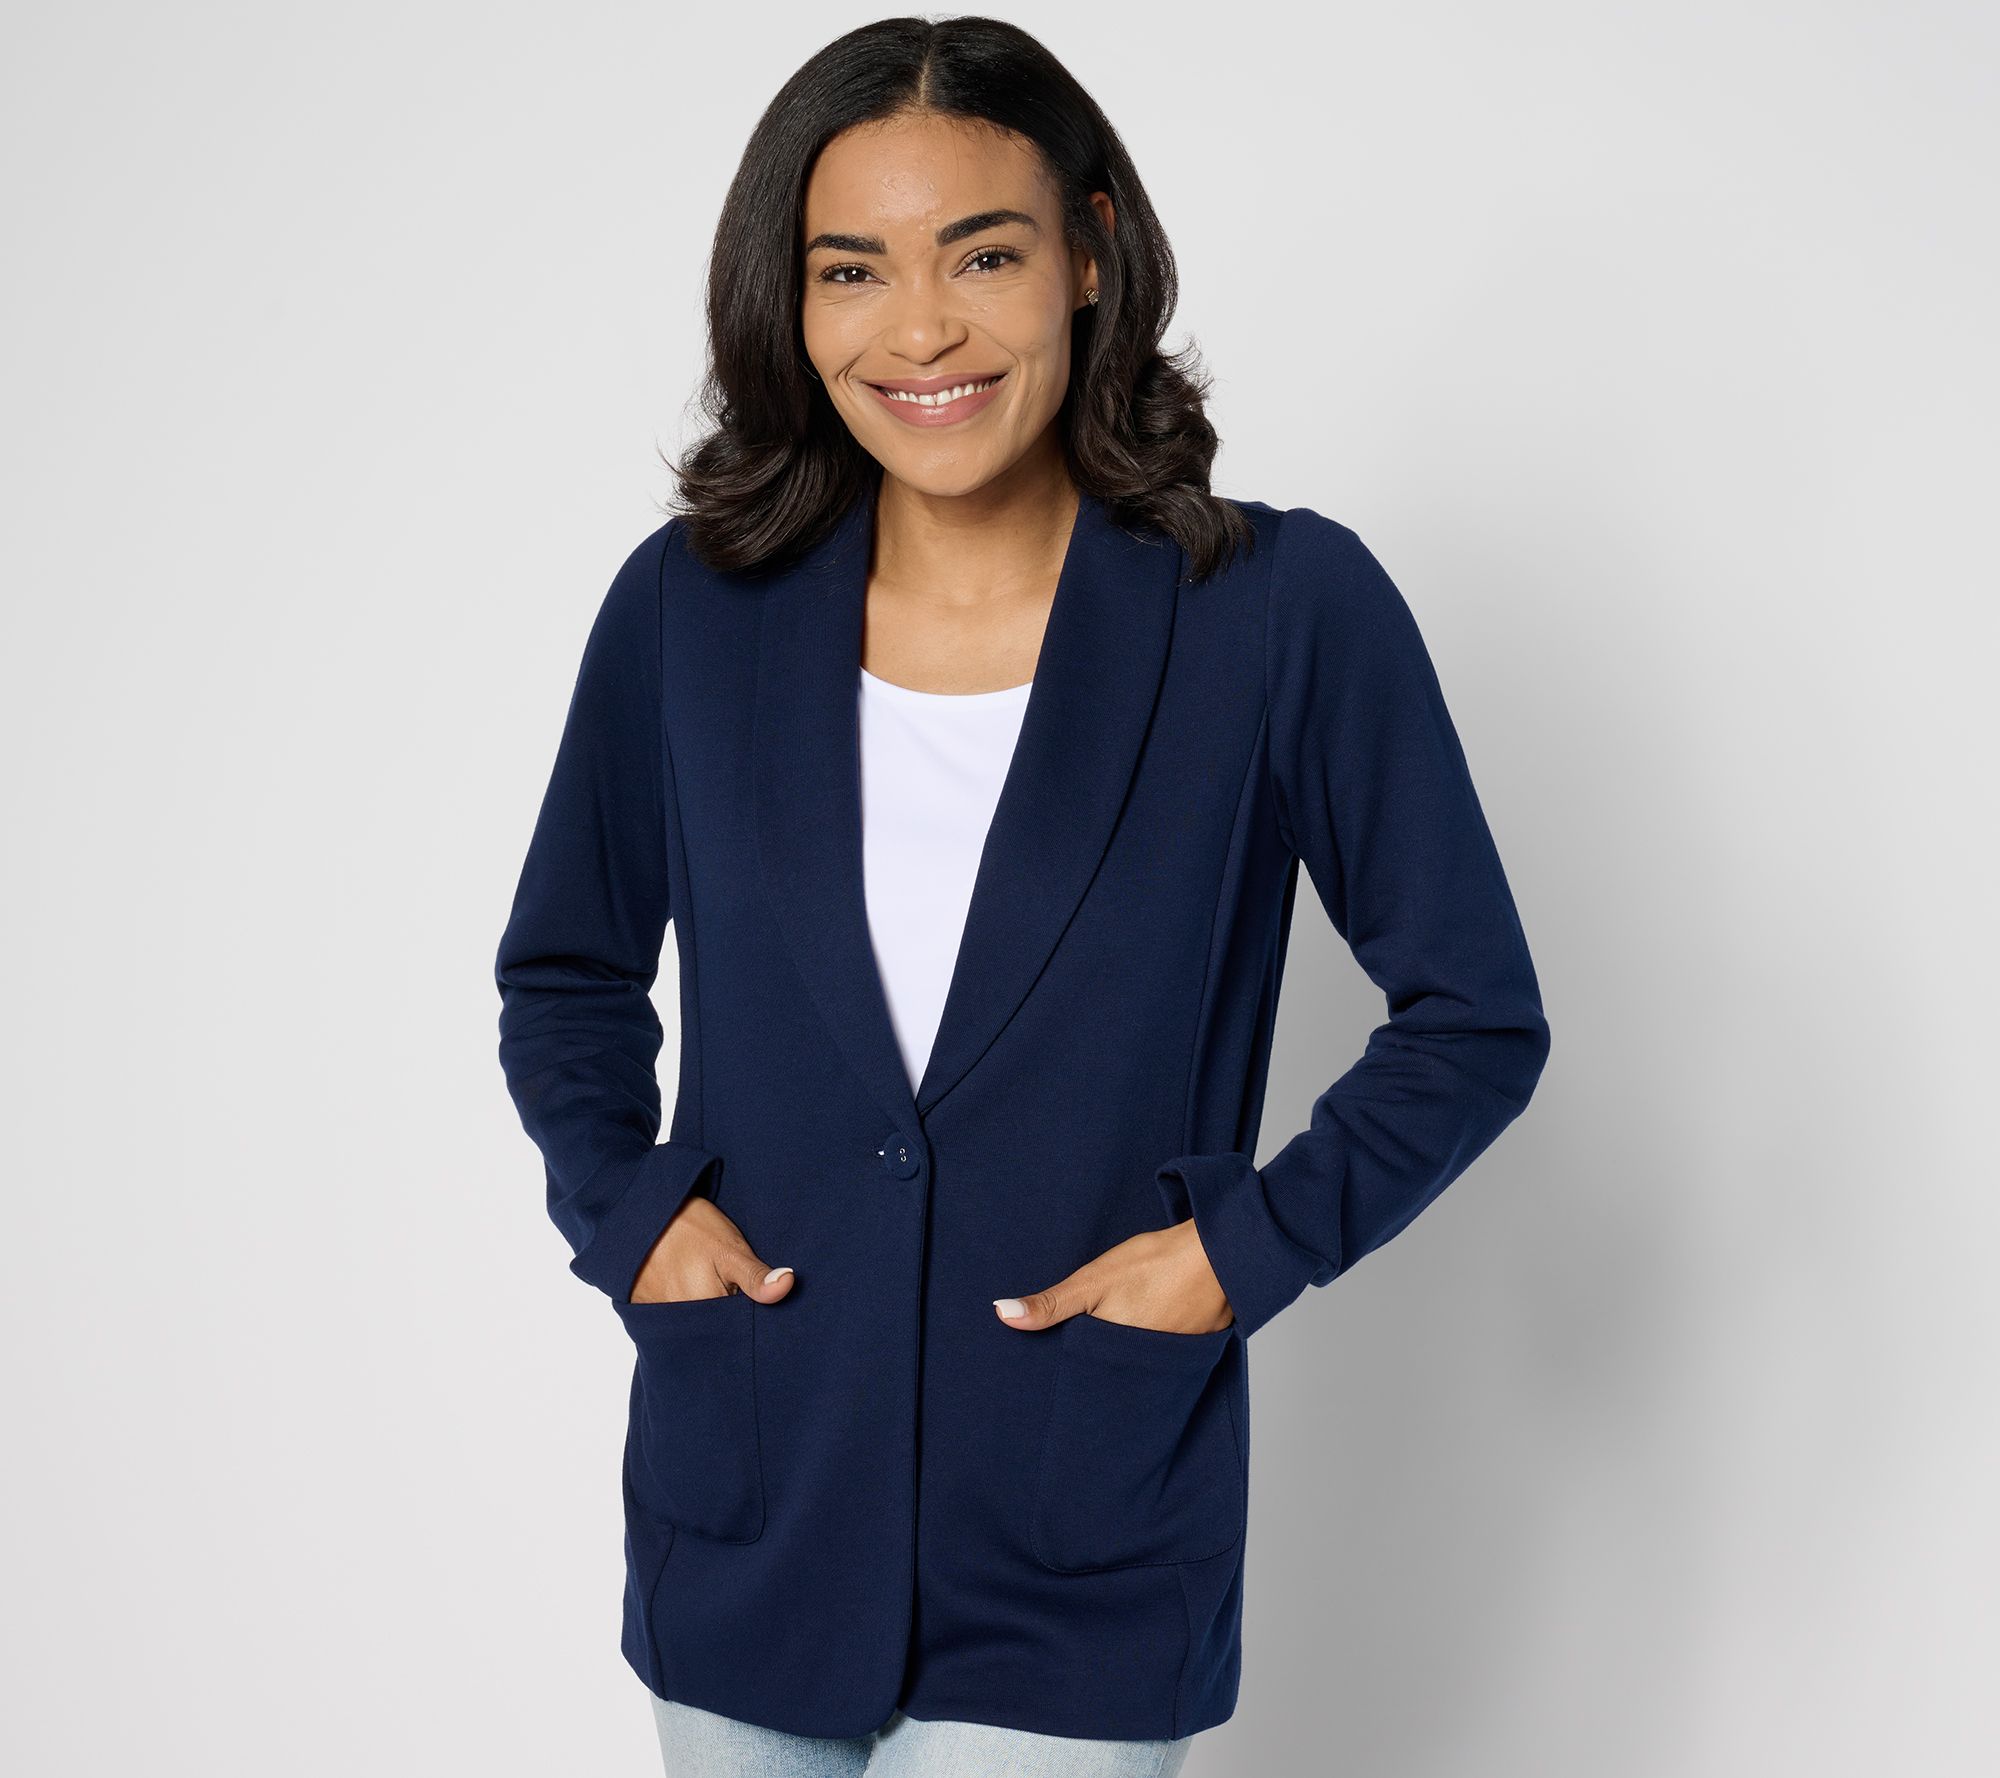 Women's Suit Jacket Shorts Two Piece Spring/Summer Casual Suit - The Little  Connection